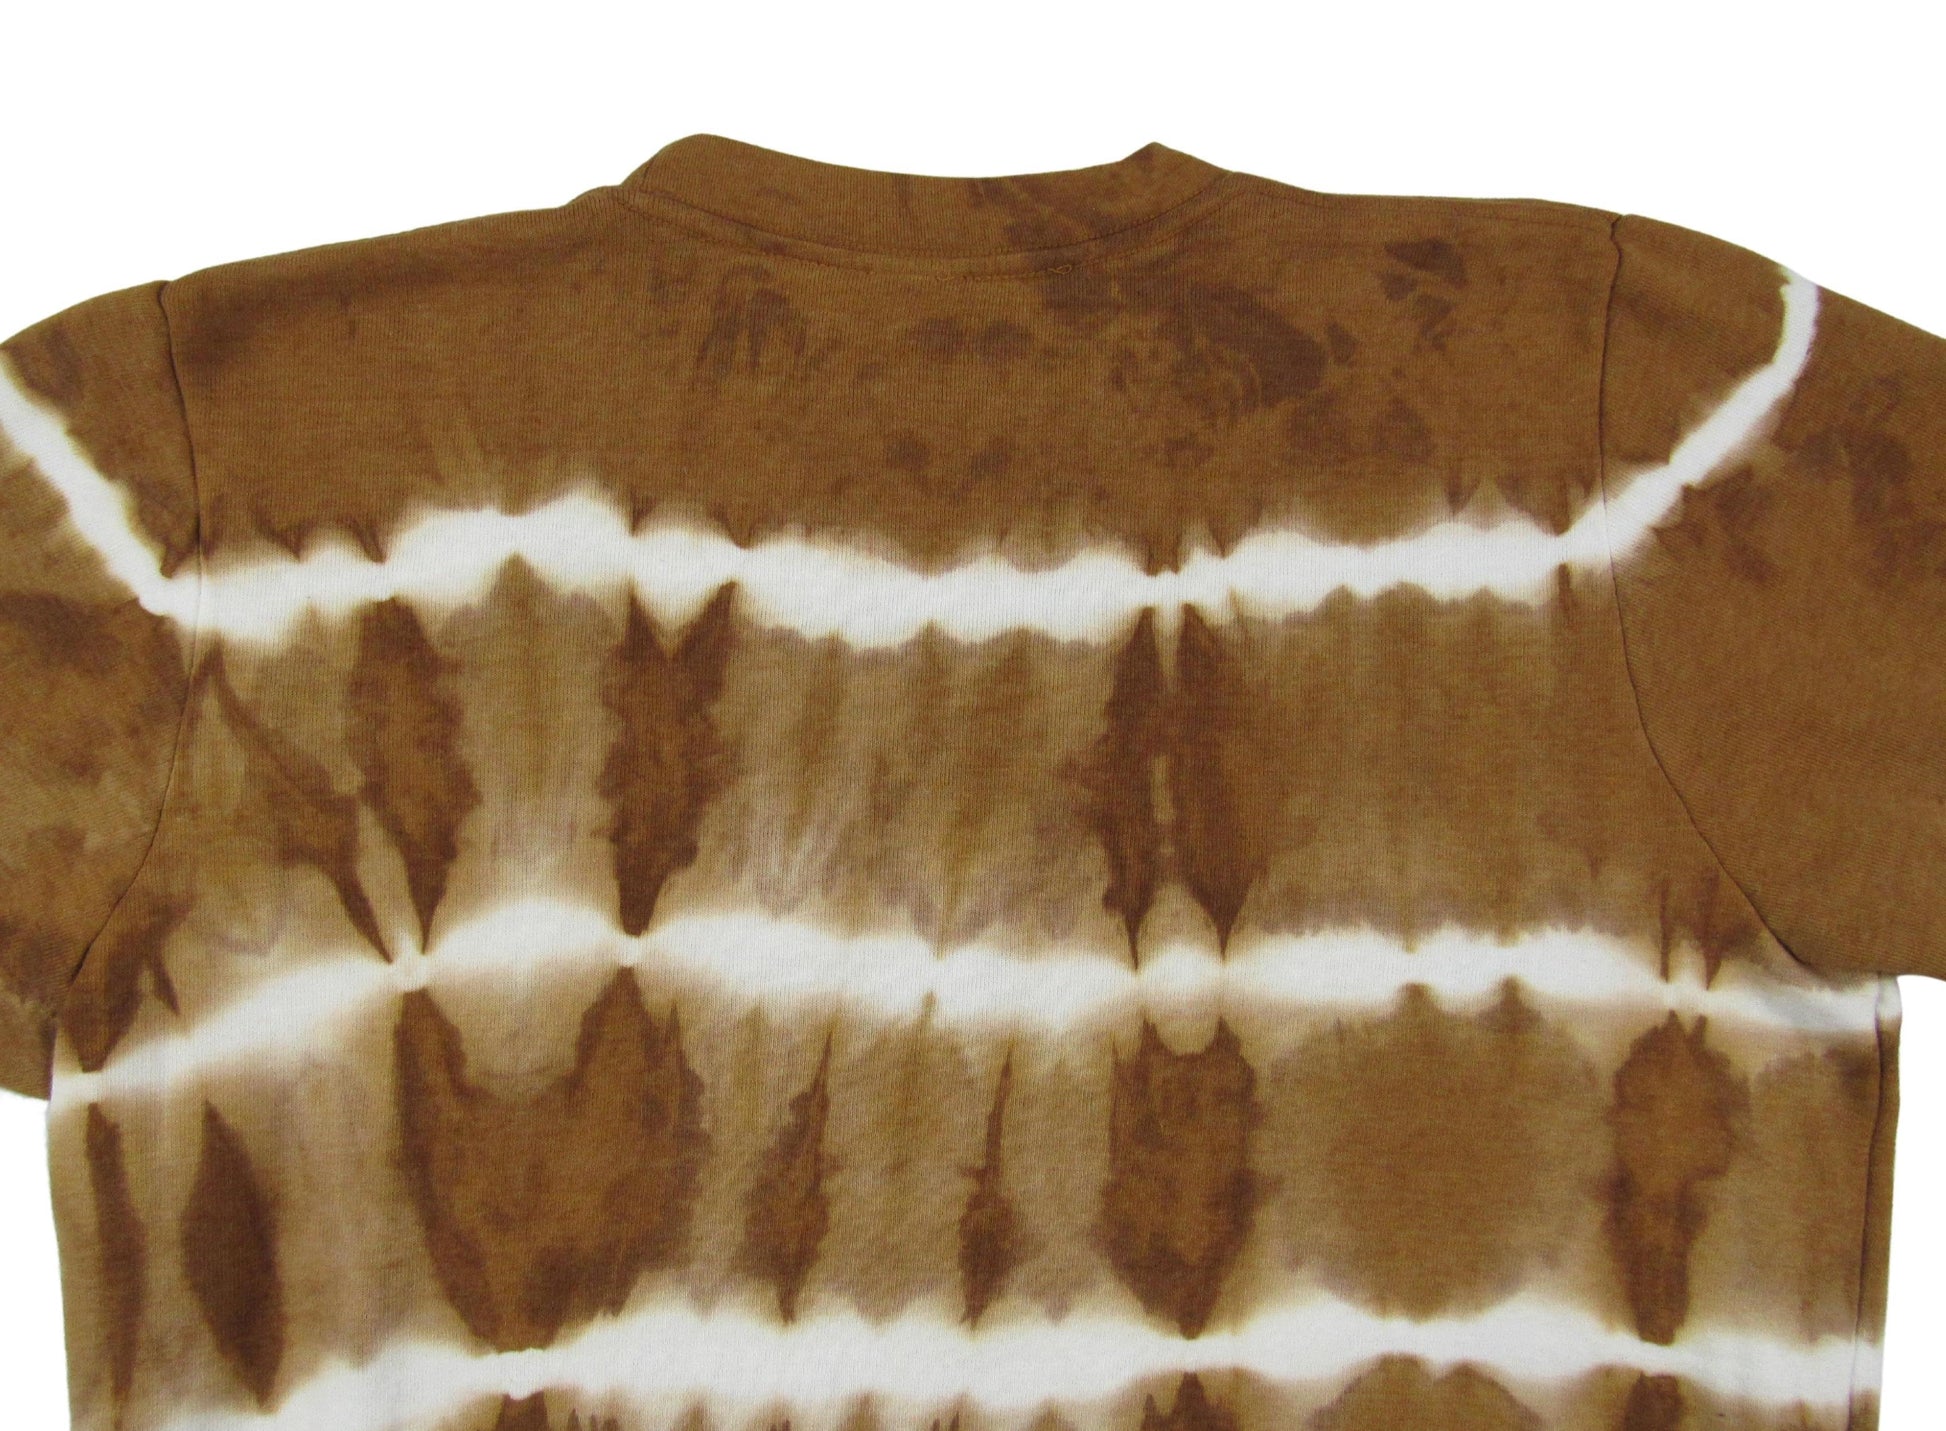 Horizontal Tie Dye Long sleeve crewneck in brown and natural by Old El Paso Shirtworks Made in USA